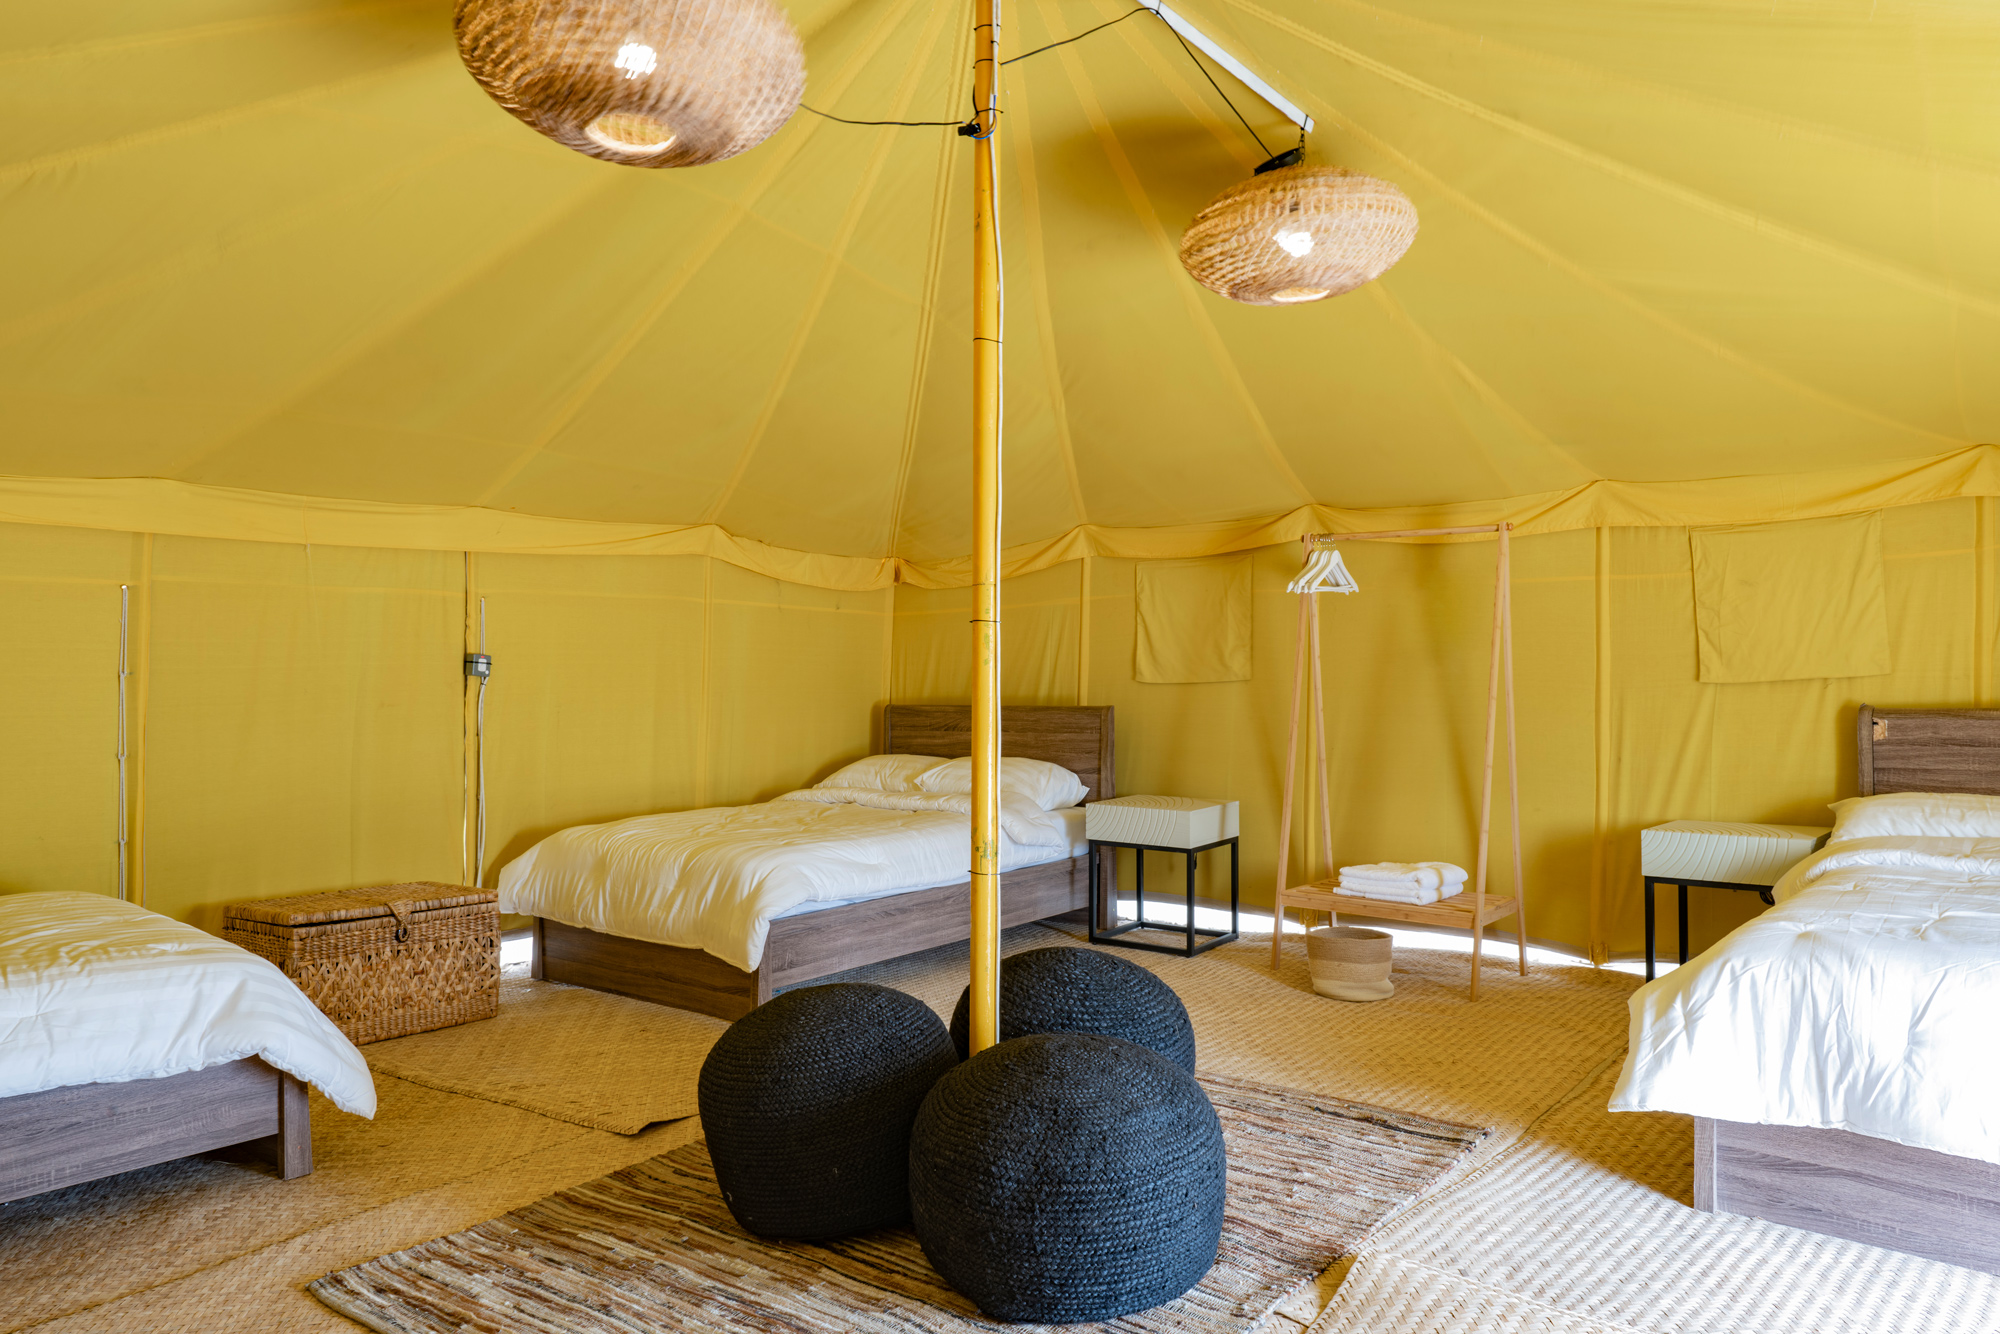 Rustic, bedouin-style tents will offer no-frills accommodations for fans during the World Cup